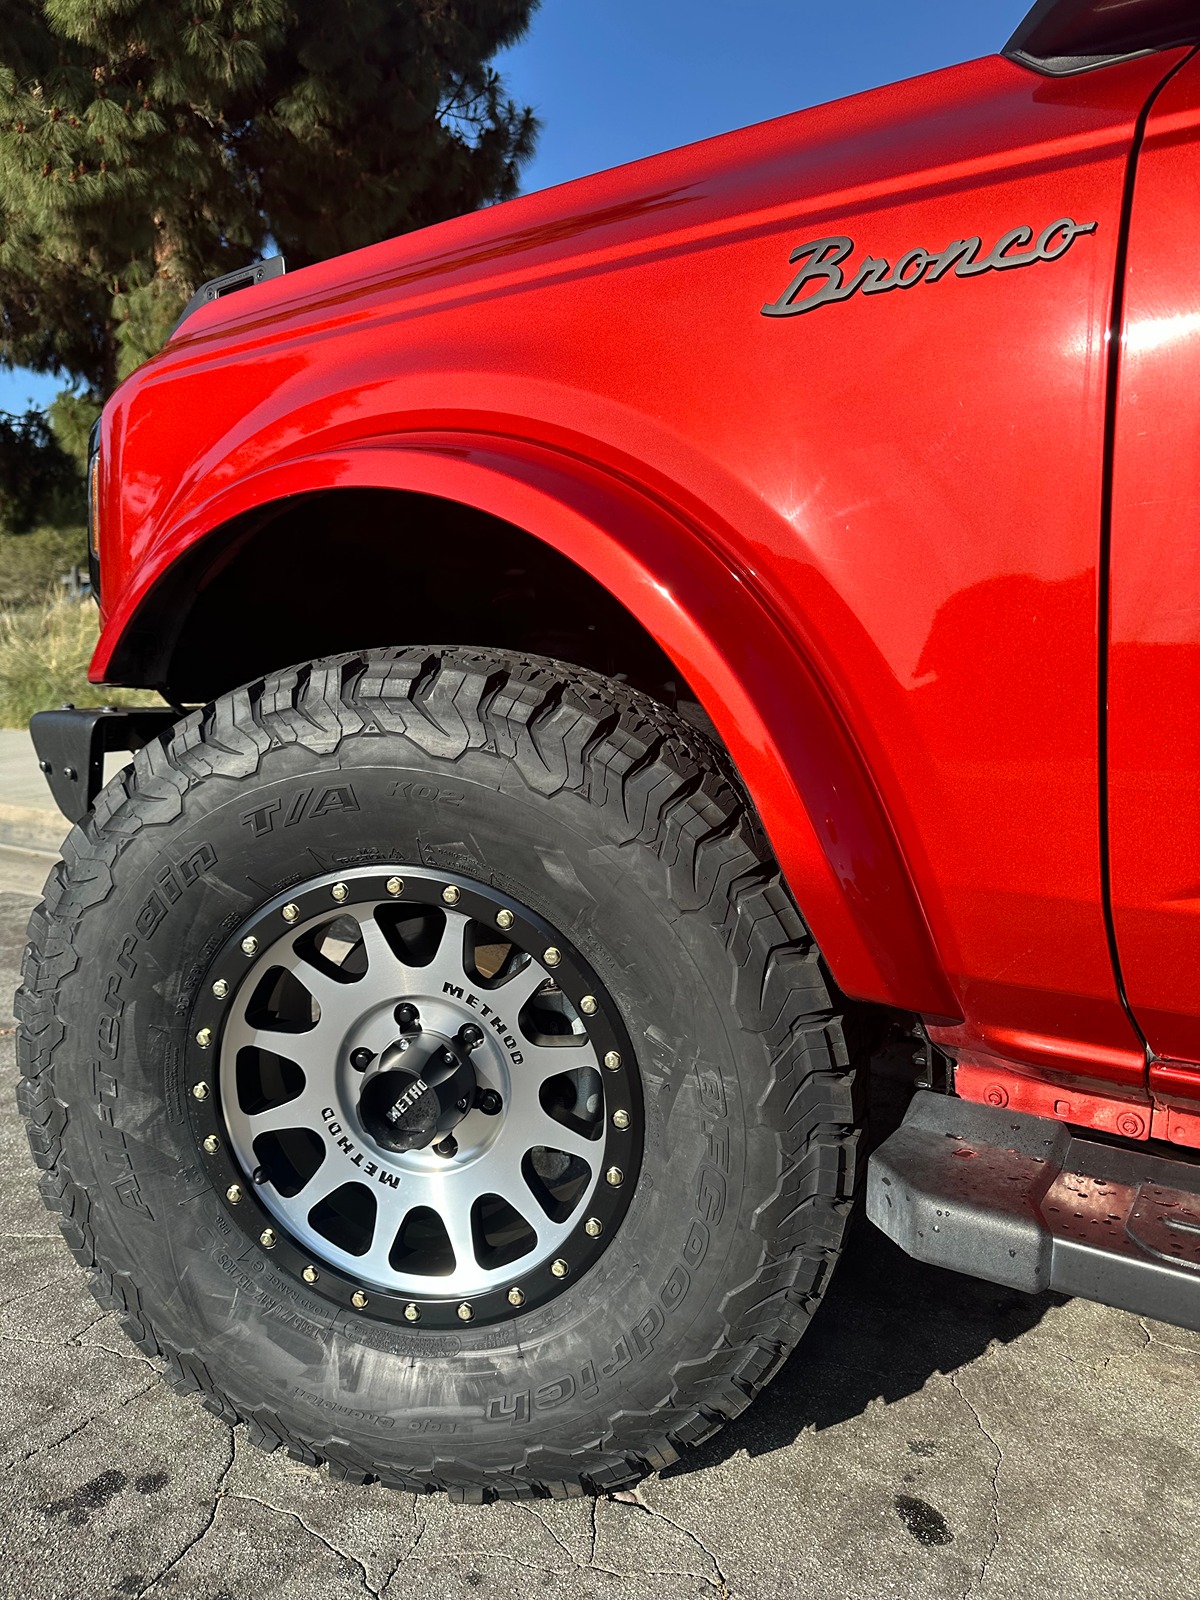 Ford Bronco OBX Tire-Wheels-Lift upgrades spreadsheet Bronco 35s (1)